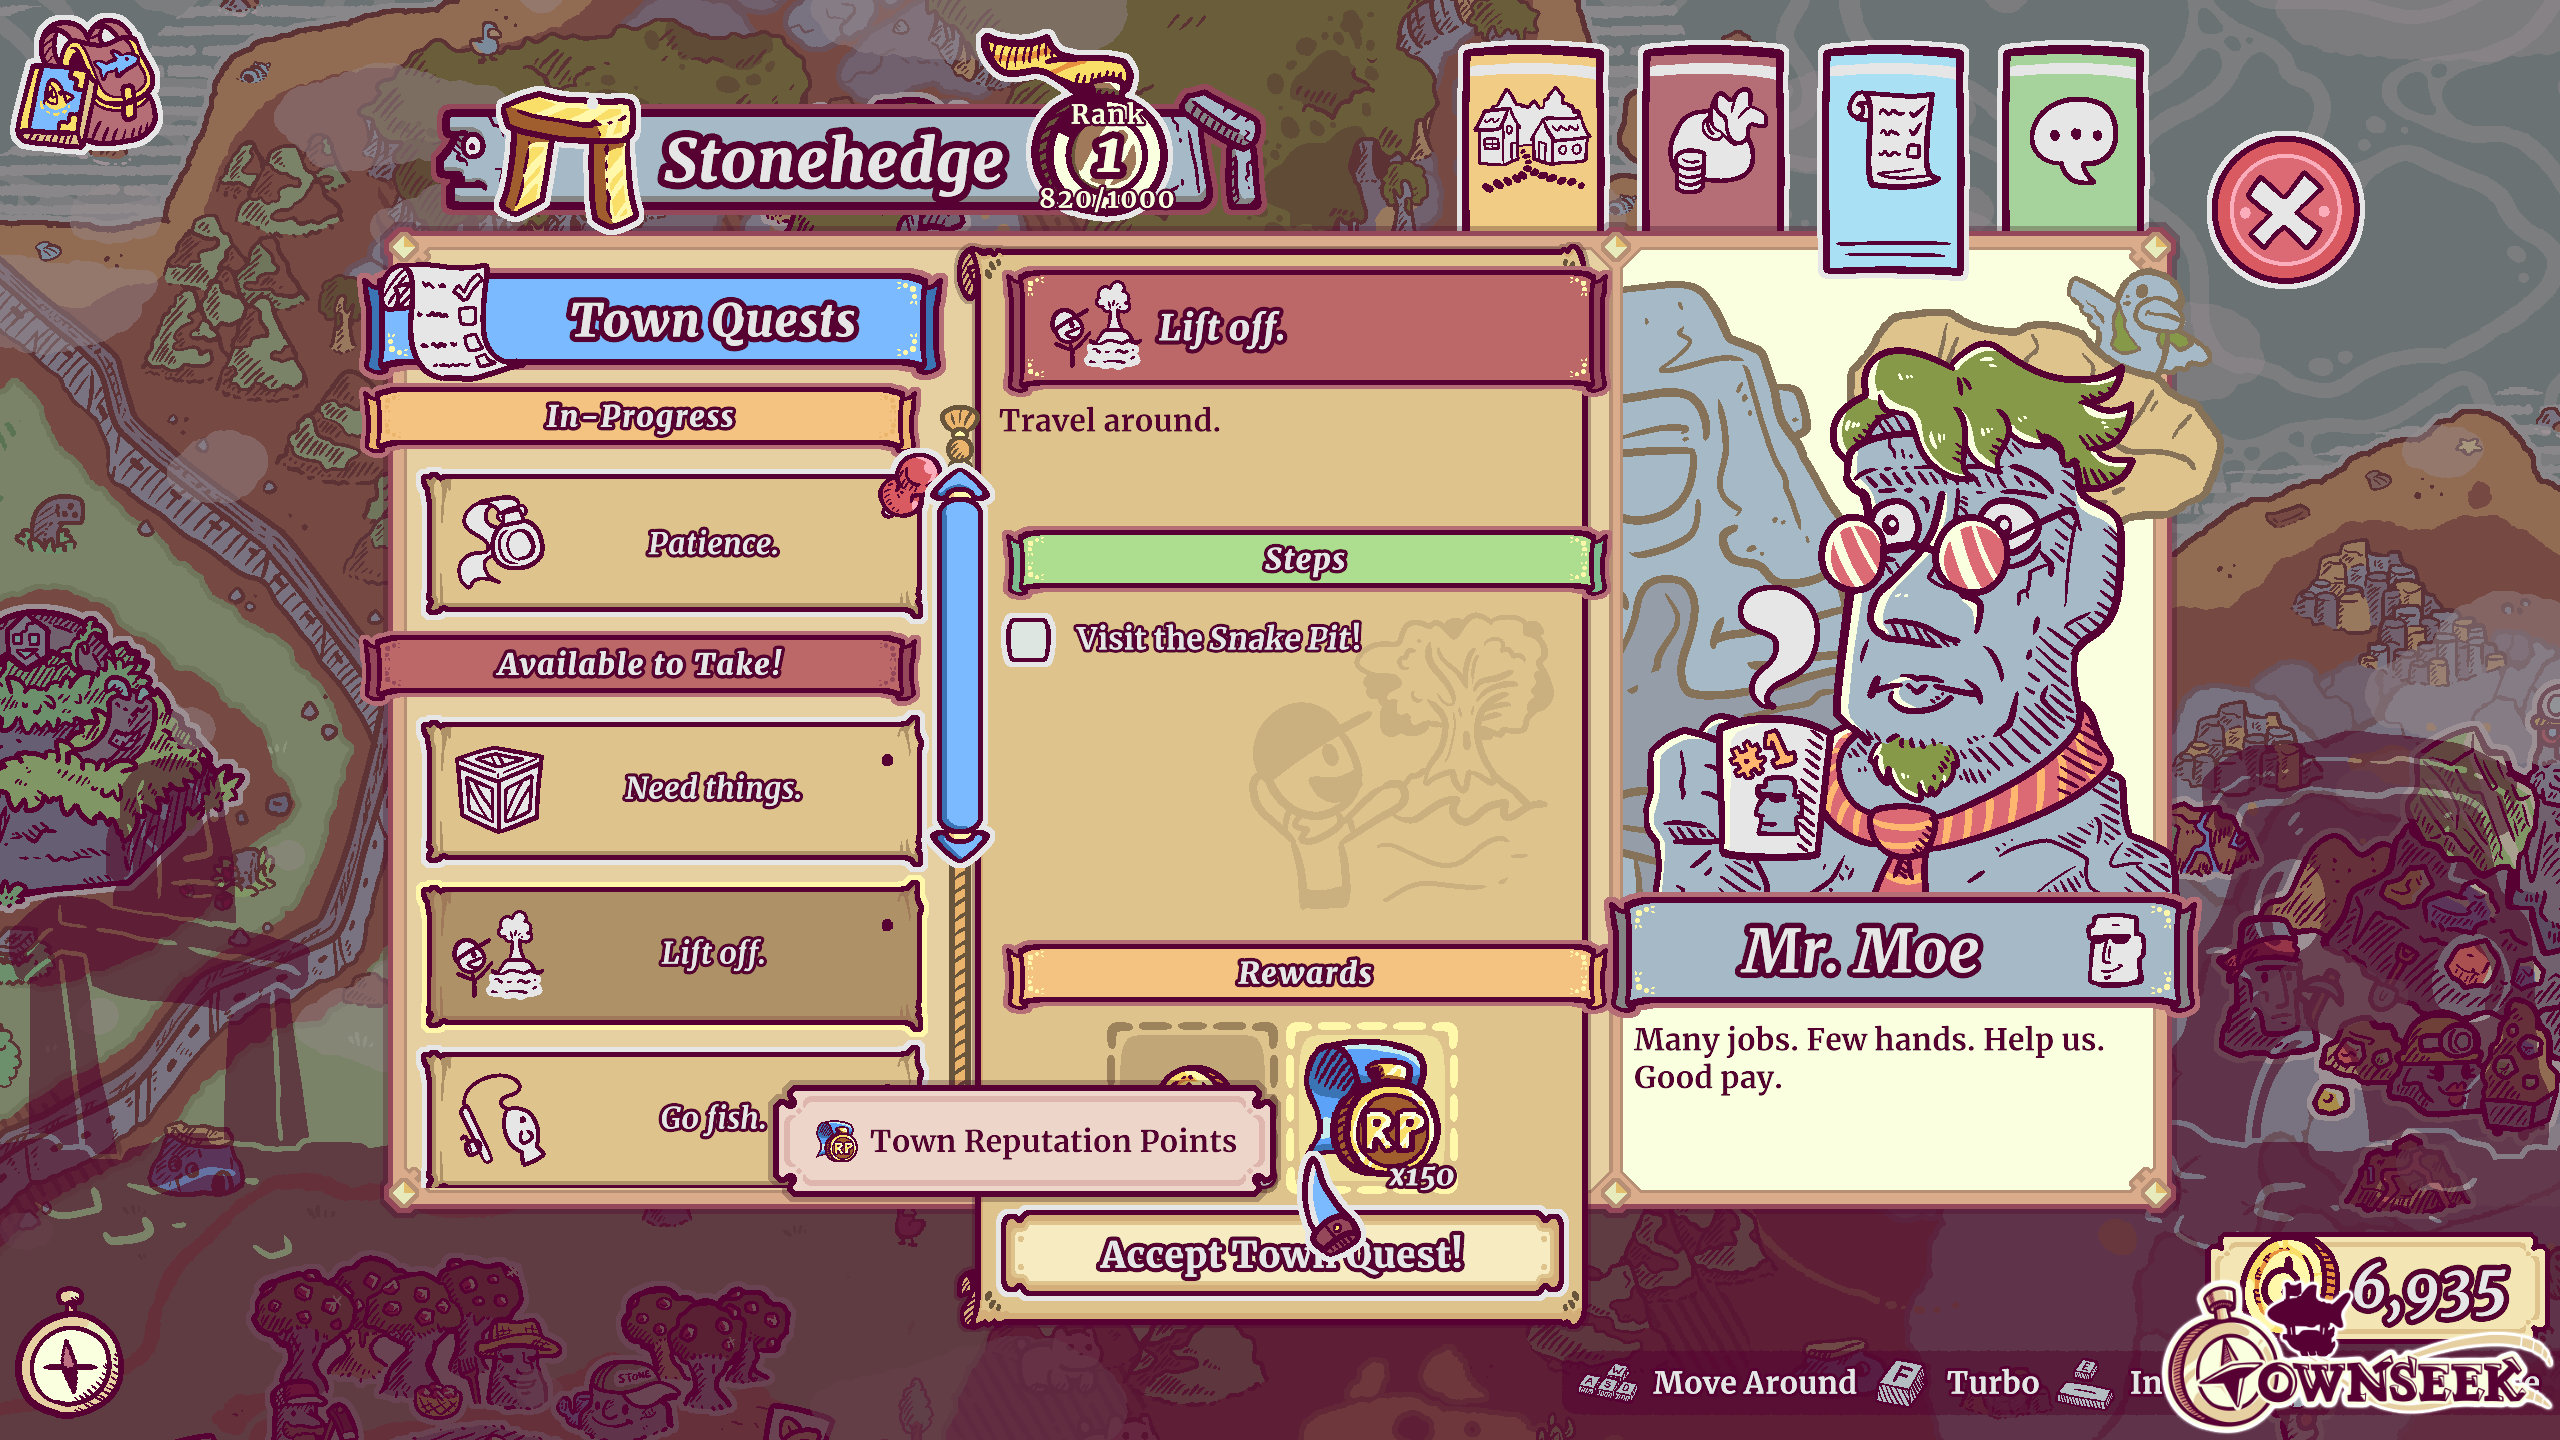 Town Quests provide you with various tasks provided to you by each town’s host! These are presented to you in the list to the left, and a set of steps and tasks on the right!